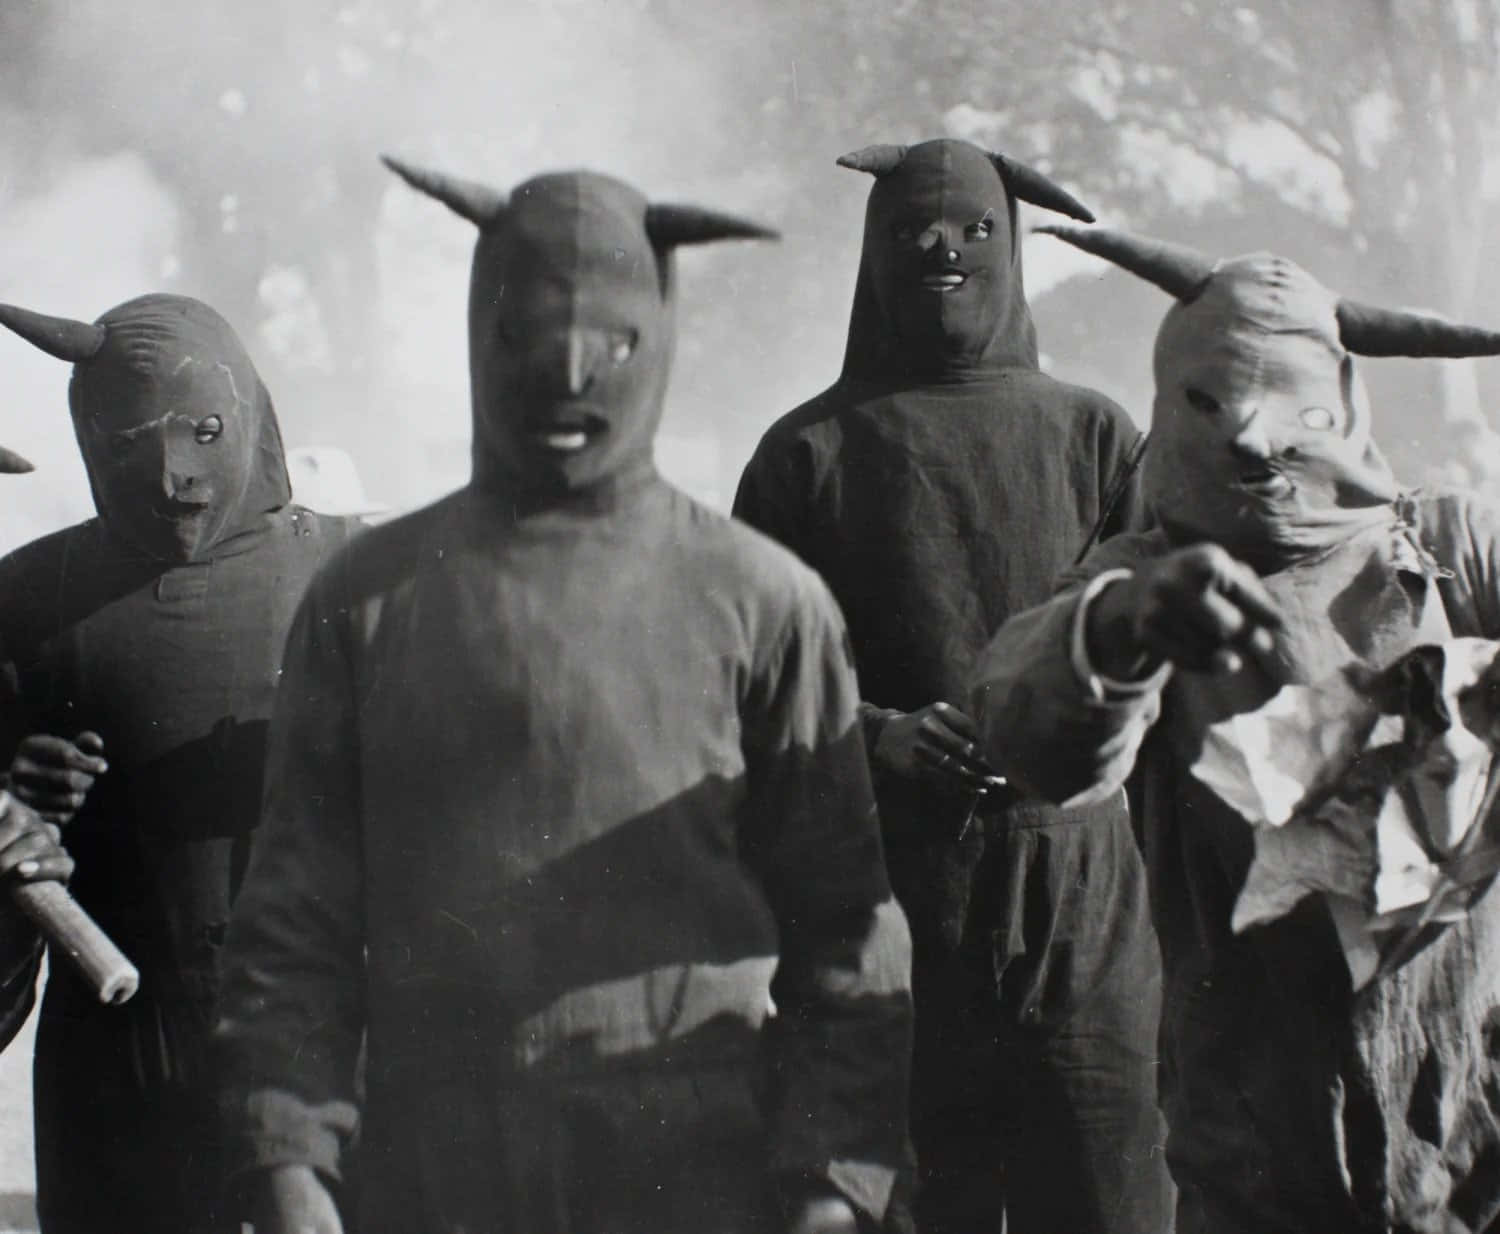 A Group Of Men In Masks Standing In A Field